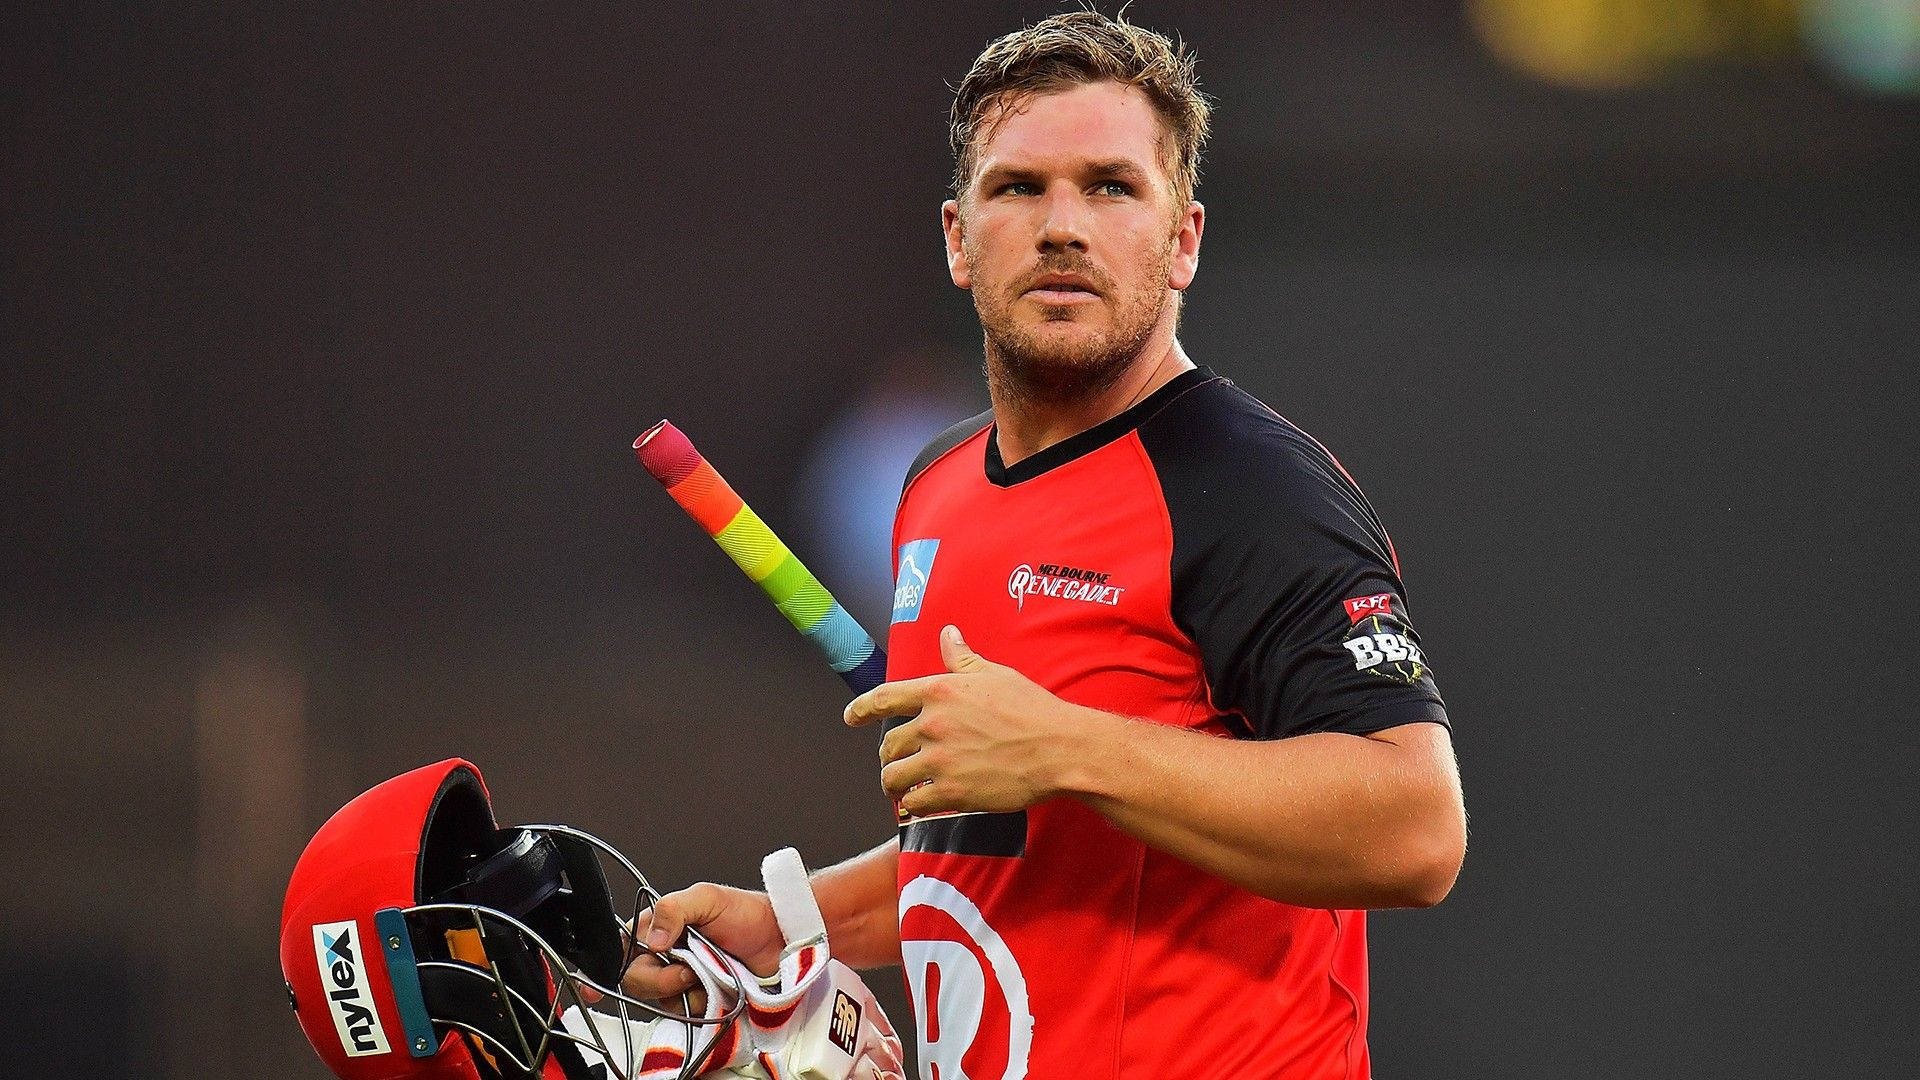 Aaron Finch Professional Cricketer Background